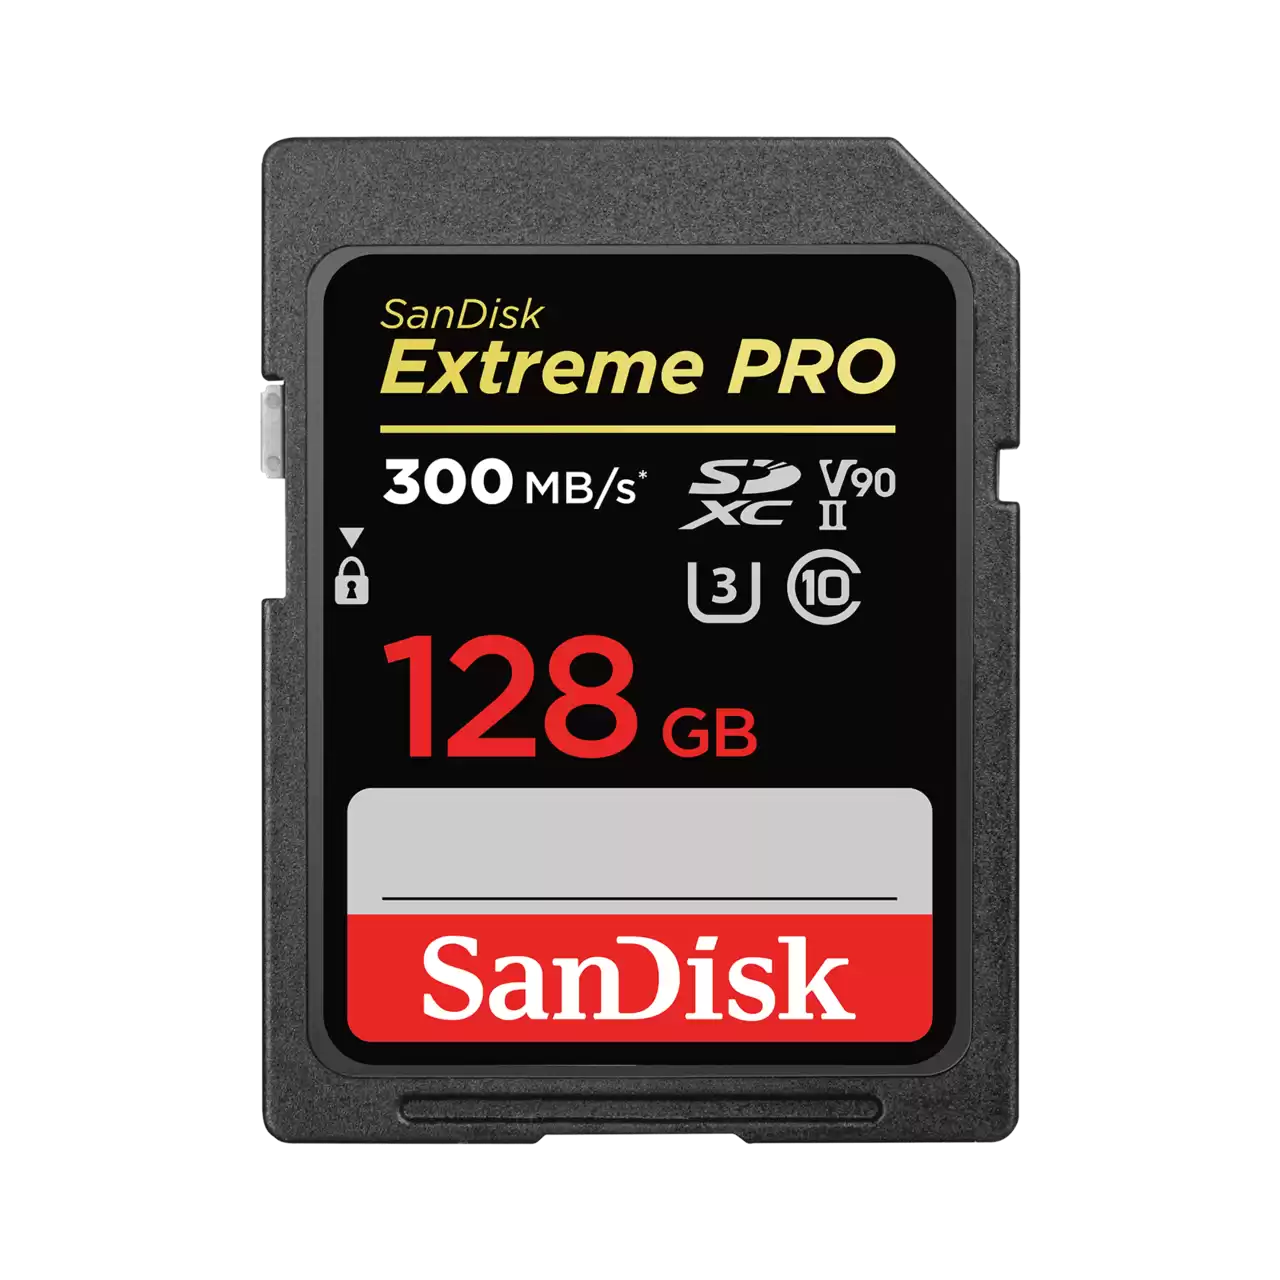 SanDisk 128GB Extreme PRO SDXC UHS-Il Memory Card - SDSDXDK-128G-GN4IN - image 1 of 2